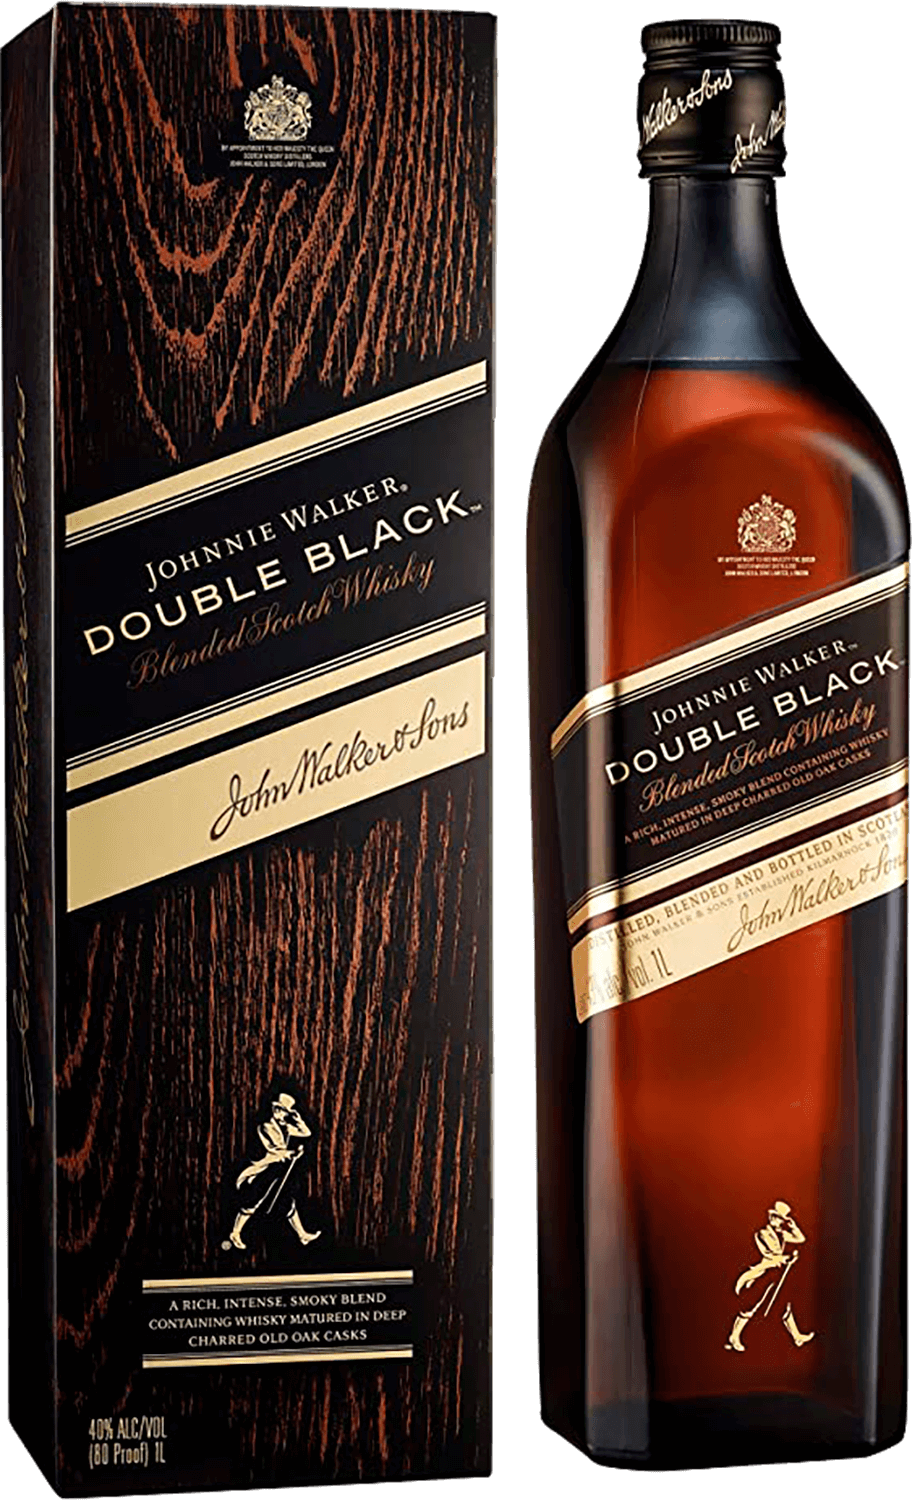 Johnnie Walker Double Black Blended Scotch Whisky (gift box) william peel double maturation blended scotch whisky